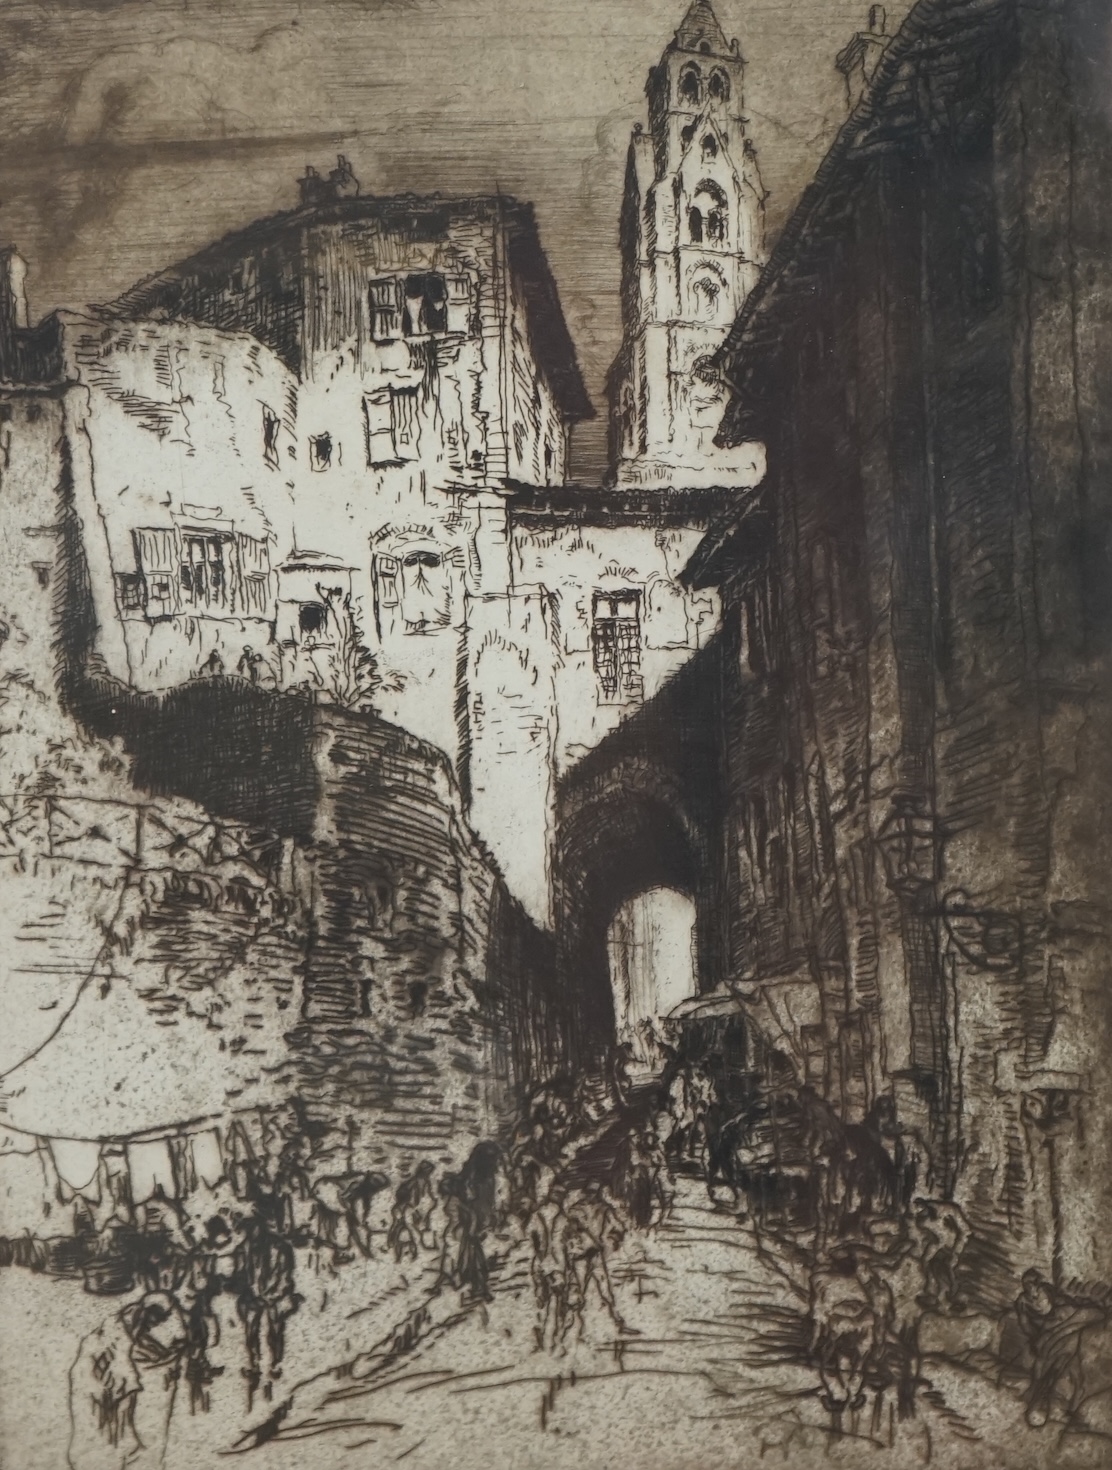 Frank Brangwyn (Welsh, 1867-1956), lithograph and etching, Street scenes with buildings, each signed in pencil, largest 42 x 31cm. Condition - poor to fair, discolouration and rippling to the paper